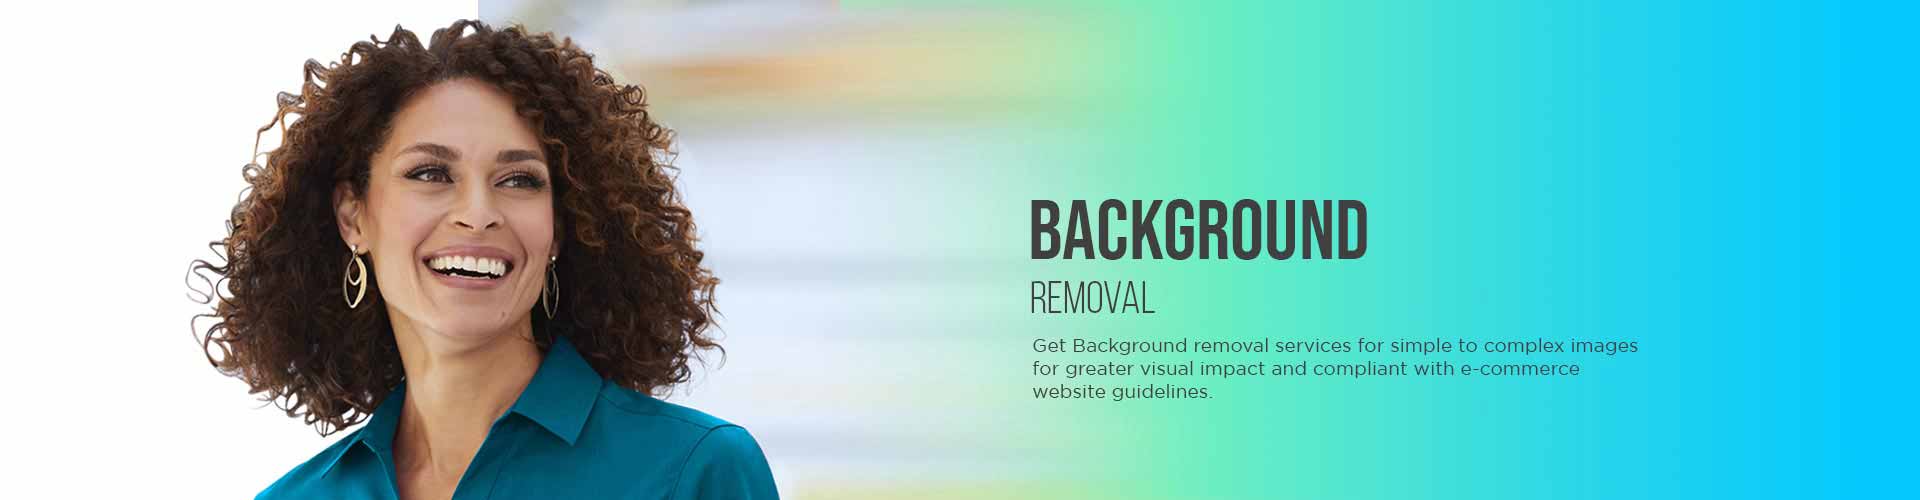 Backgroud Removal